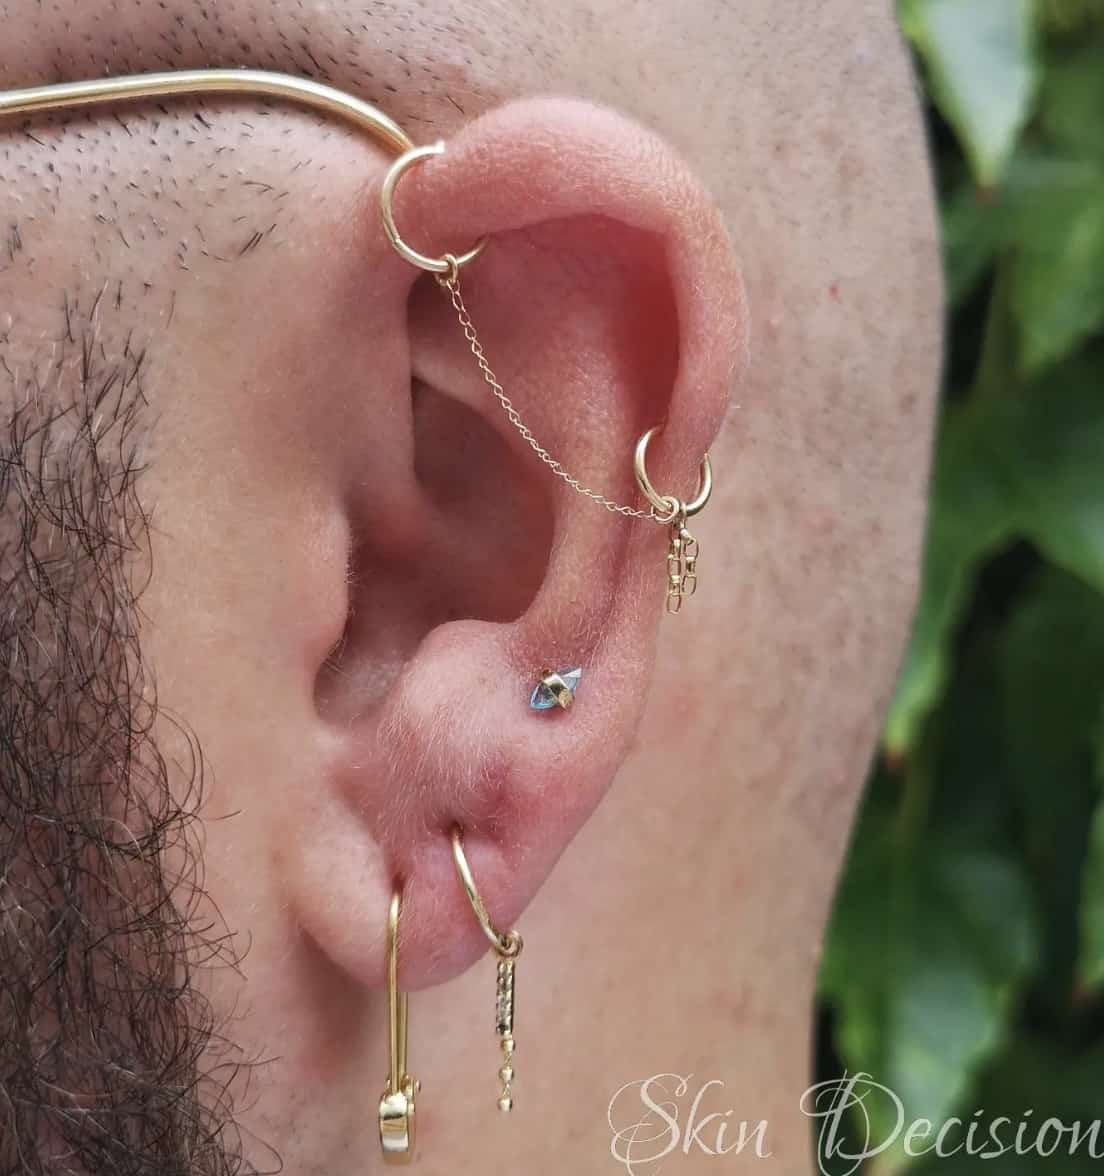 close up of an ear with lots of piercings